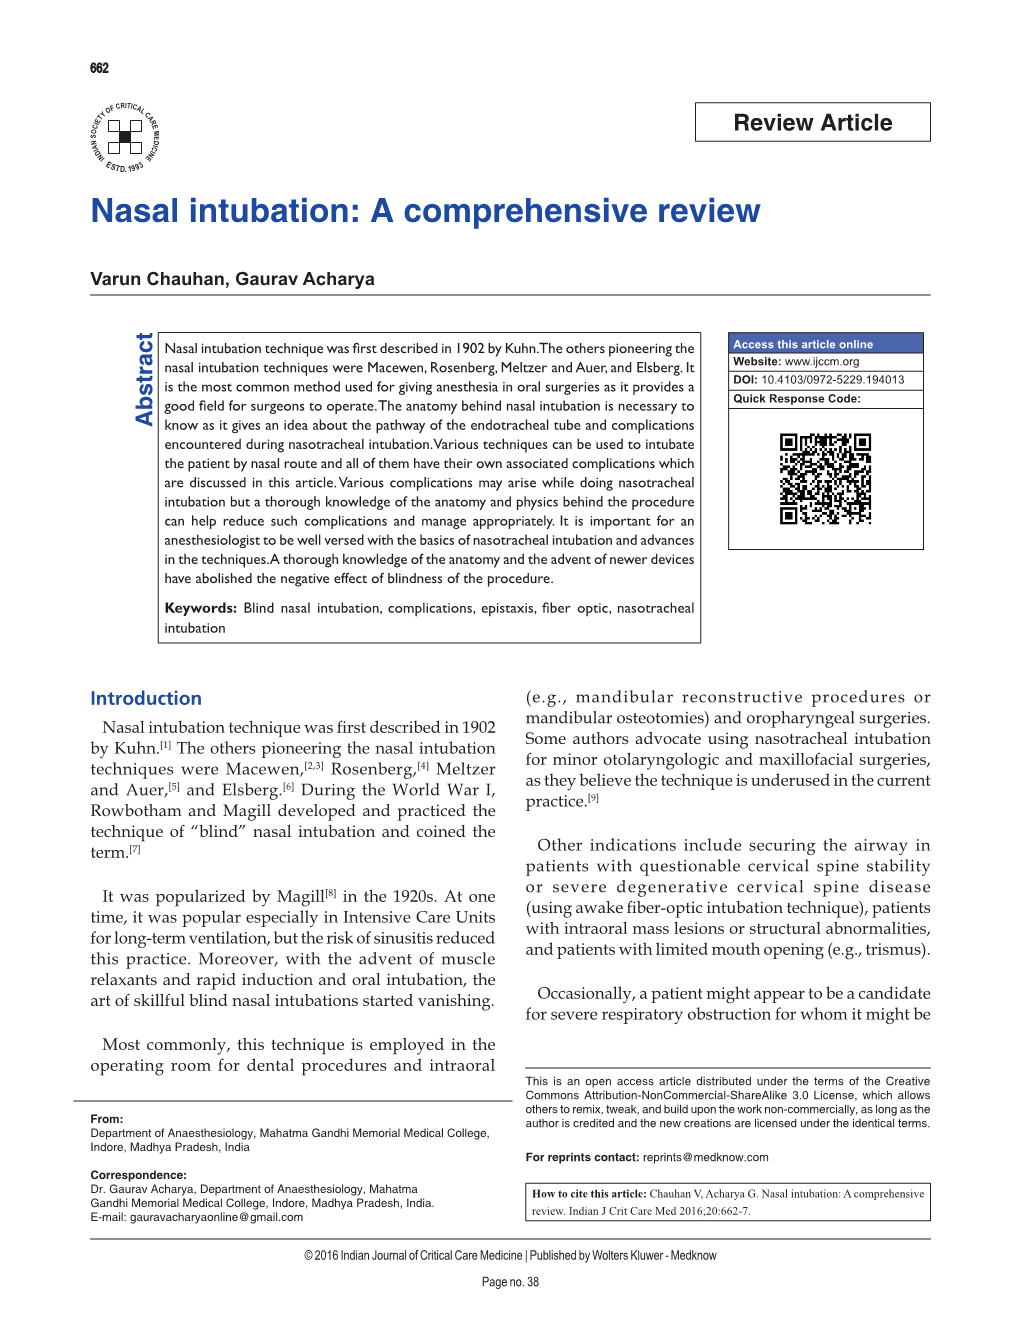 Nasal Intubation: a Comprehensive Review